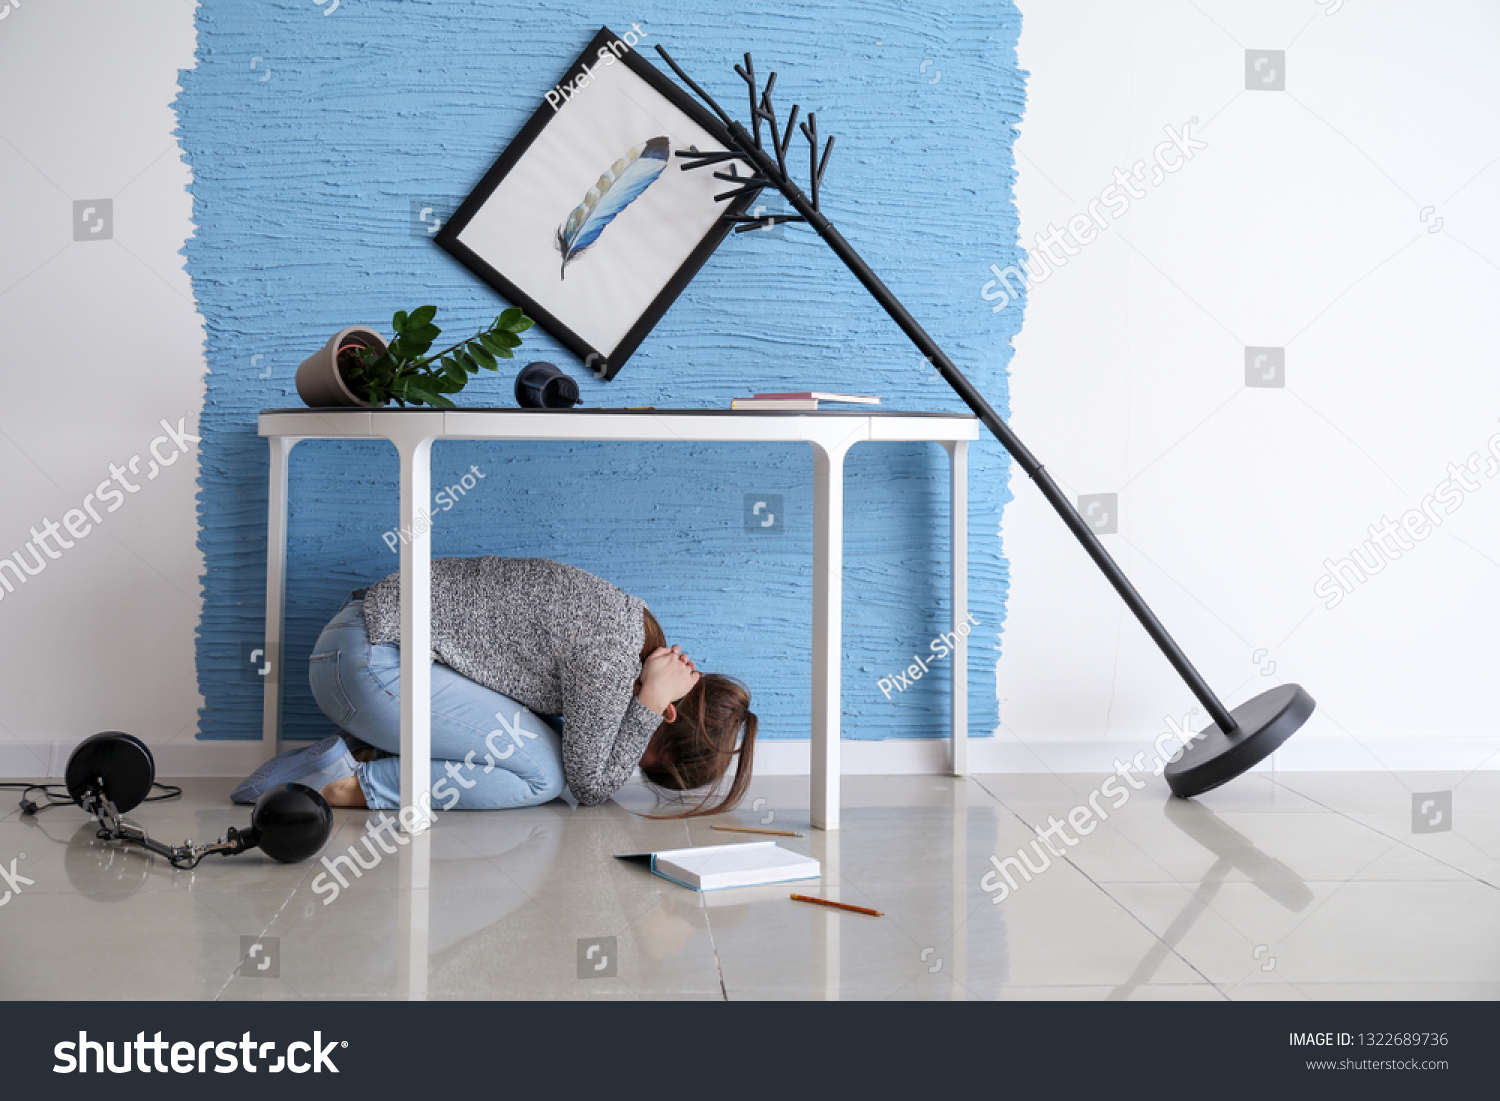 Young woman hiding under table during earthquake #1322689736